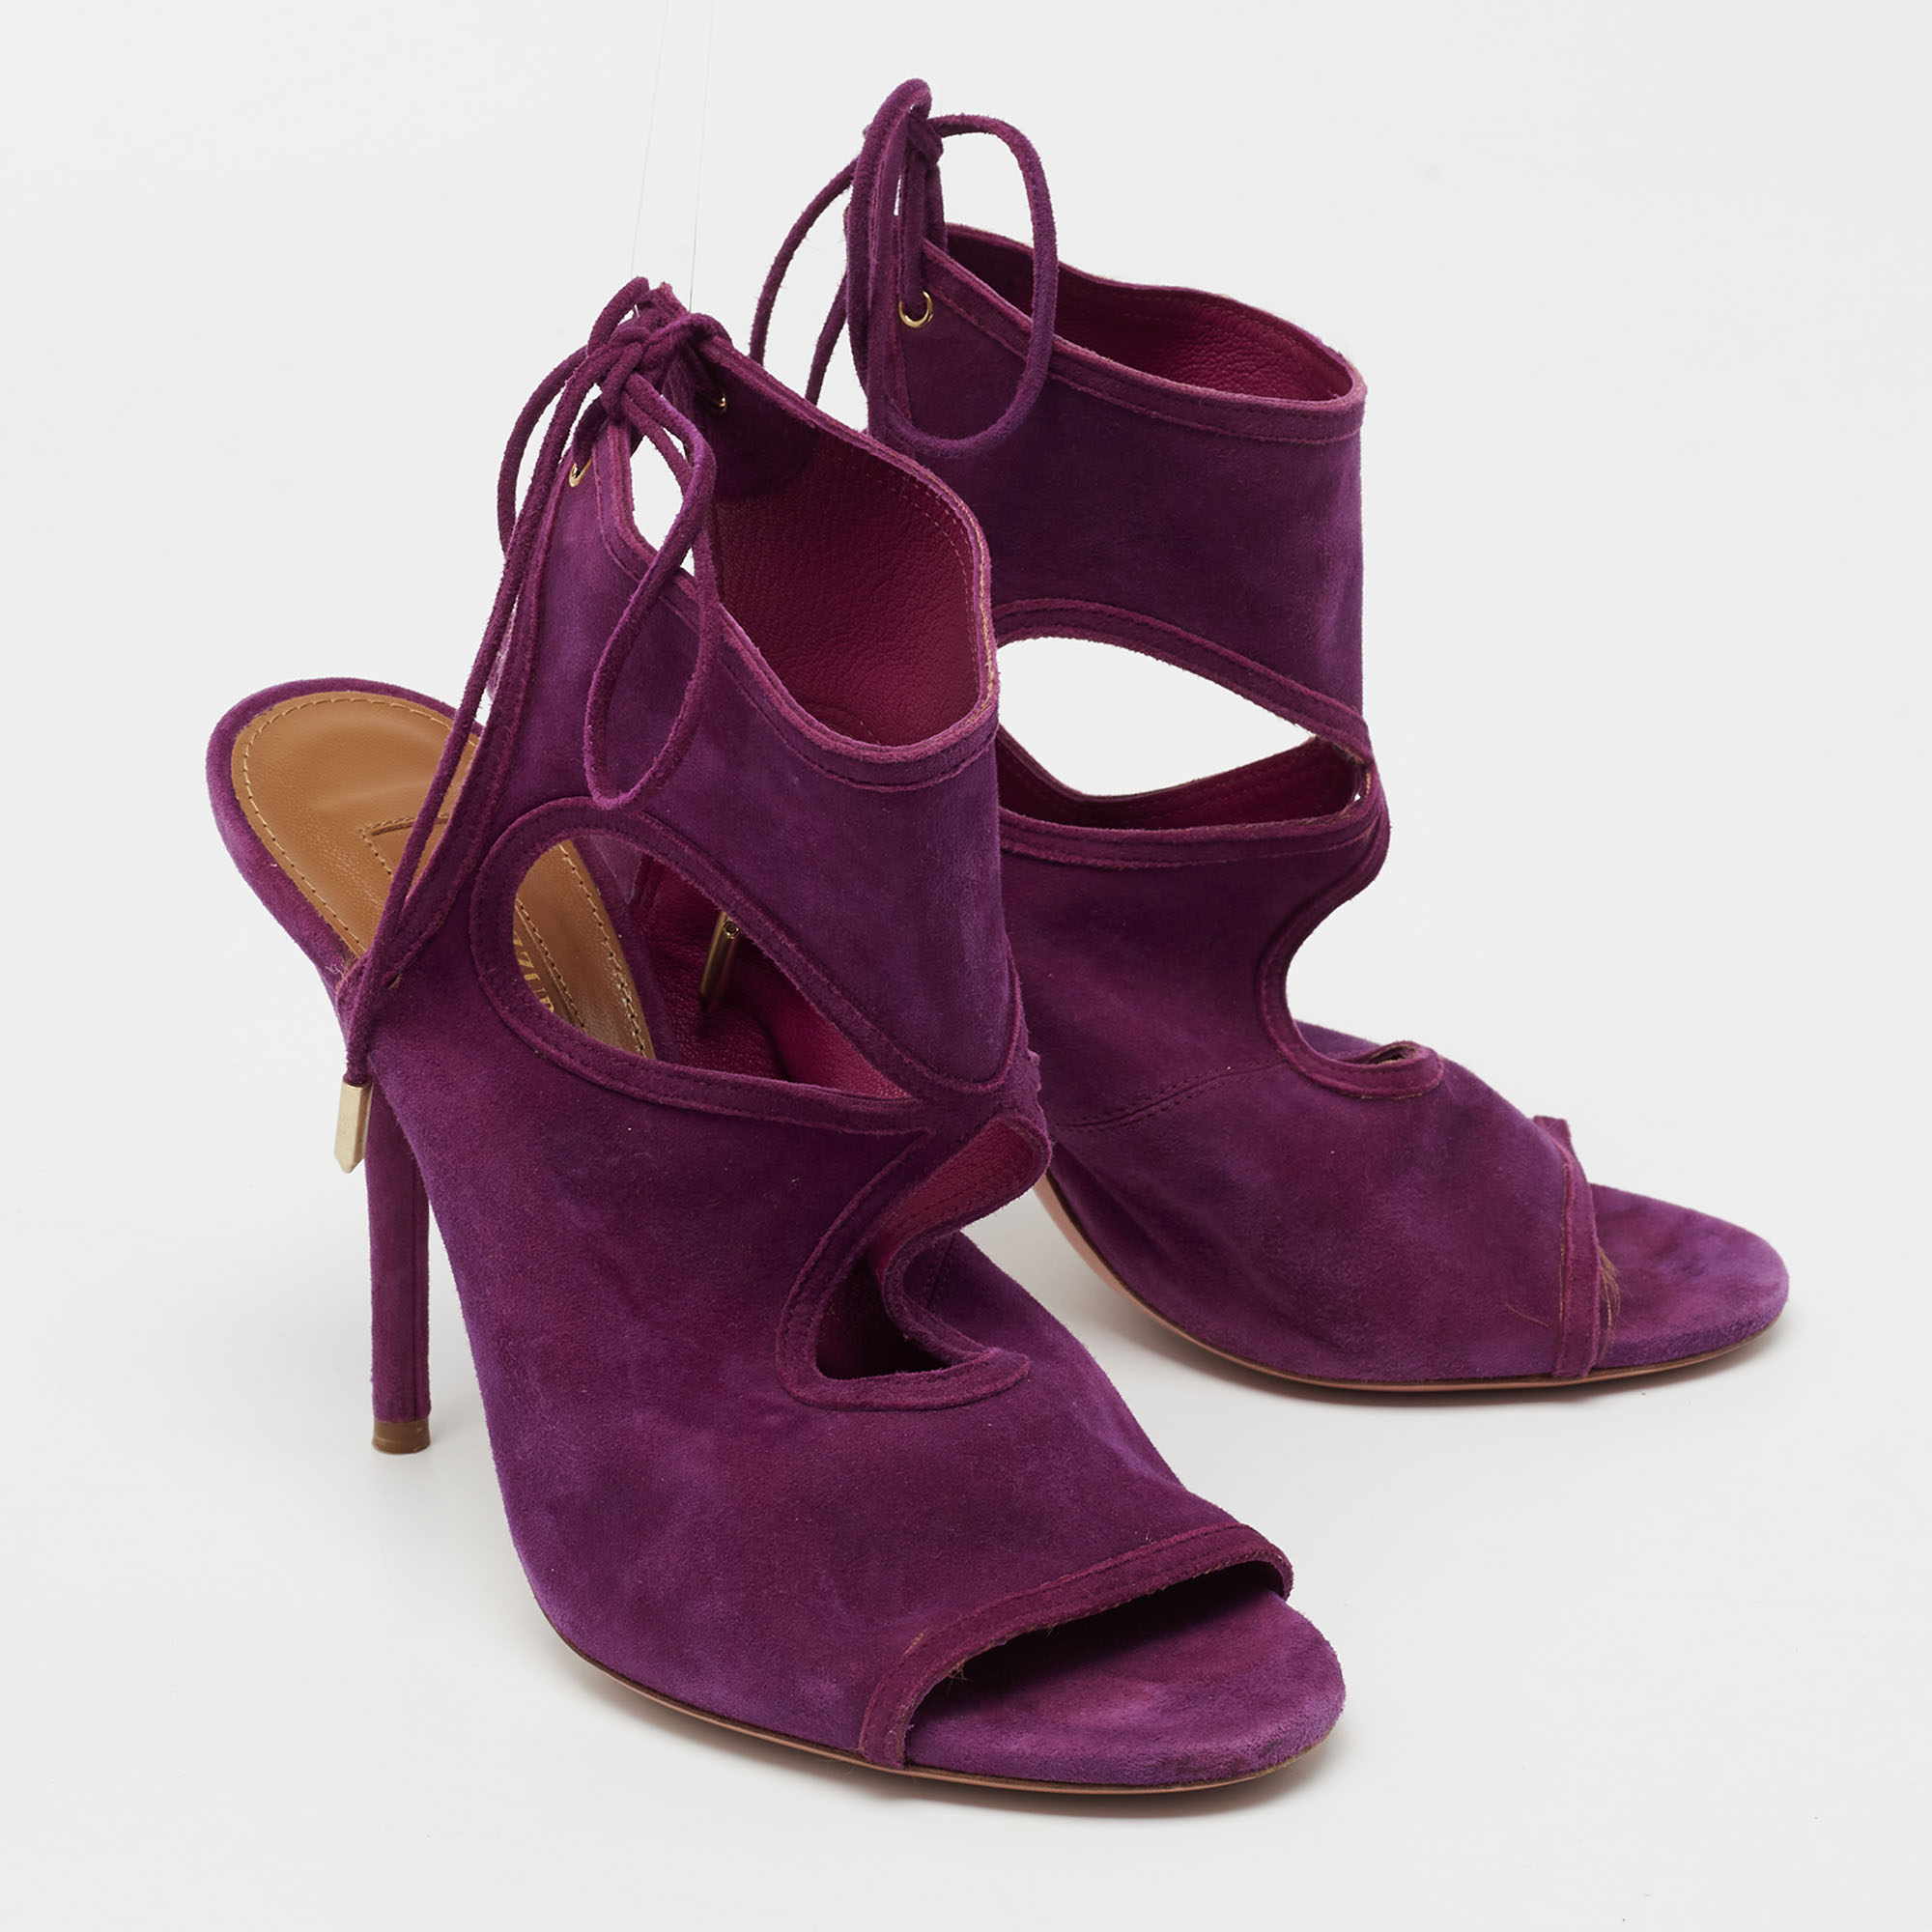 Aquazzura Purple Cut Out Suede Sexy Thing Tie Up Sandals Size 37